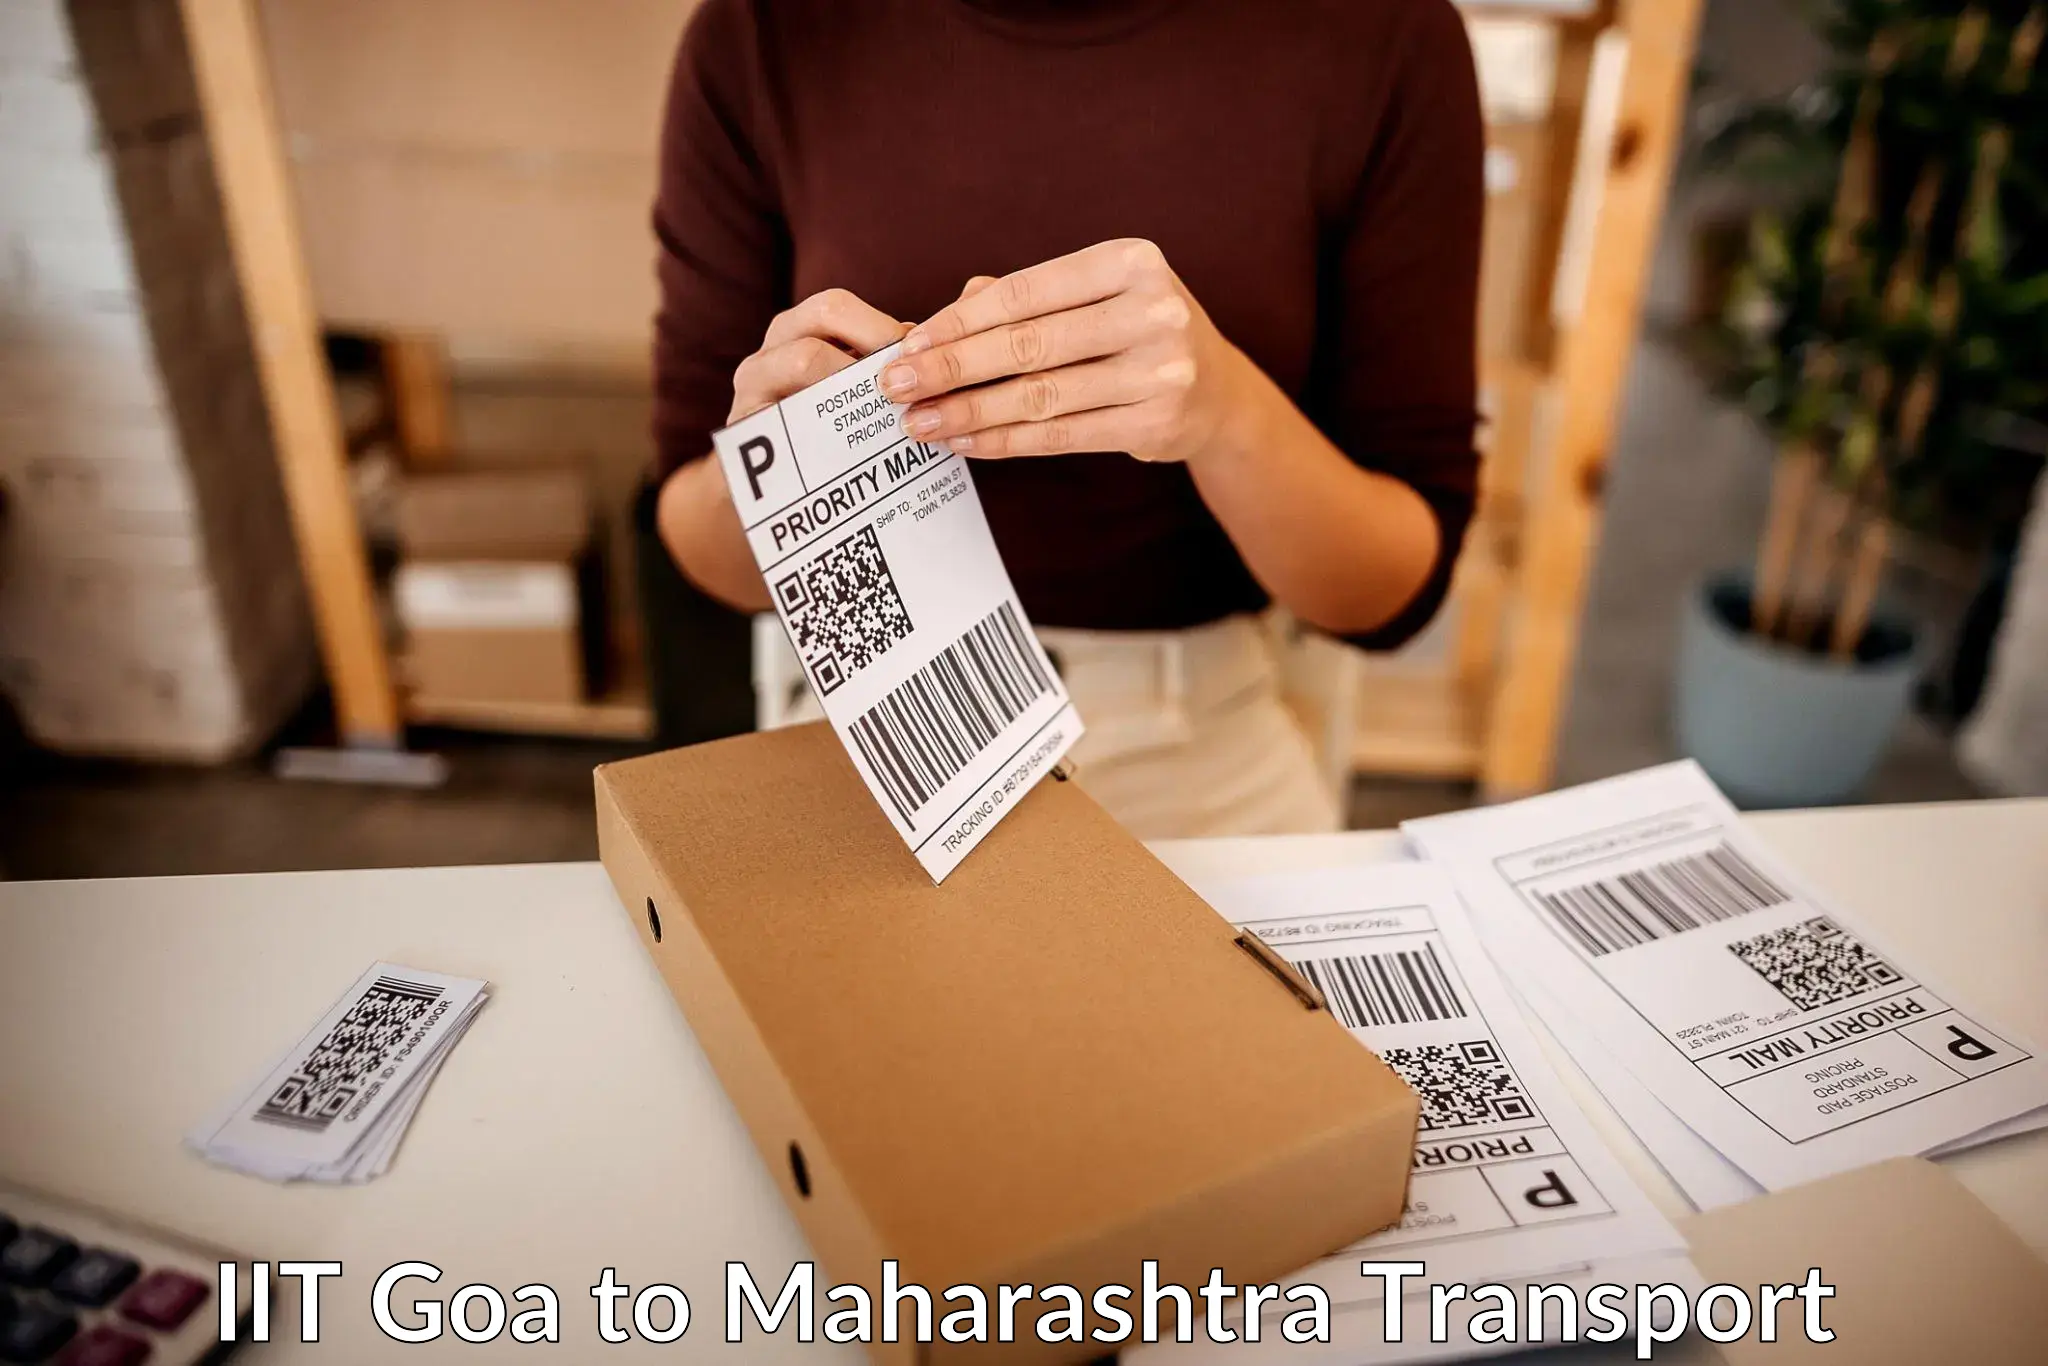 Goods delivery service IIT Goa to Lonere